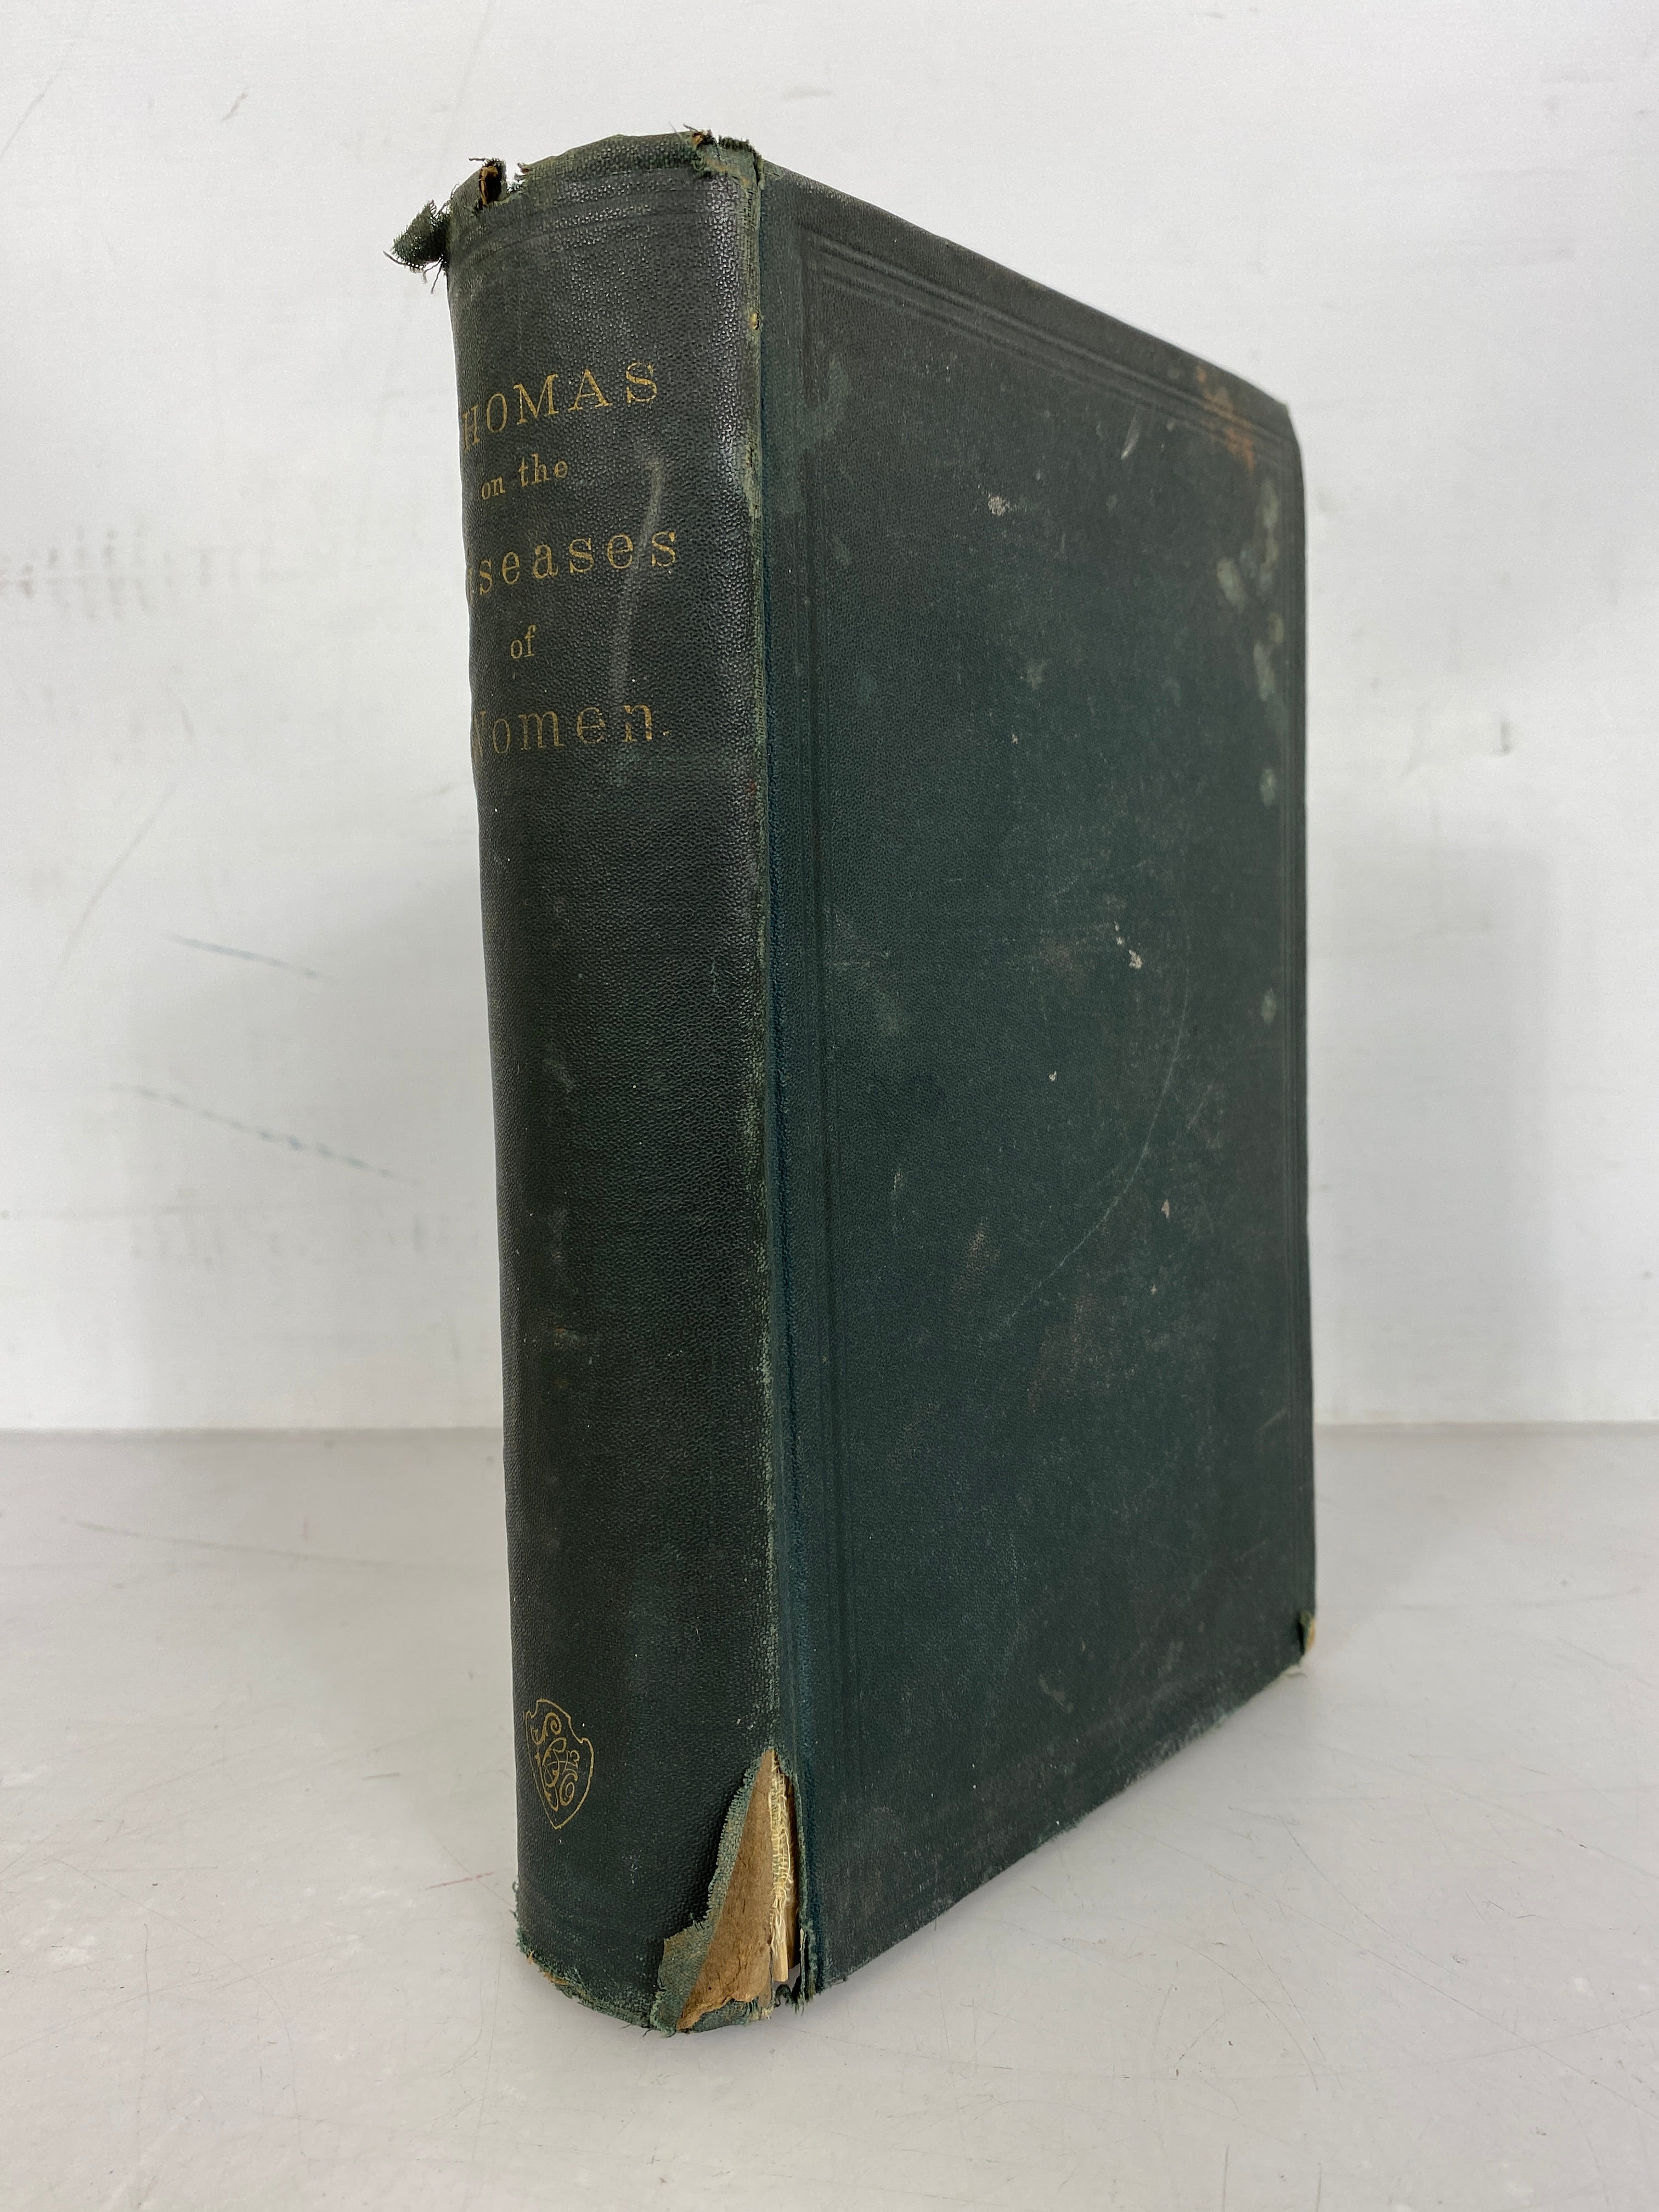 A Practical Treatise on the Diseases of Women by T. Gaillard Thomas 1880 HC